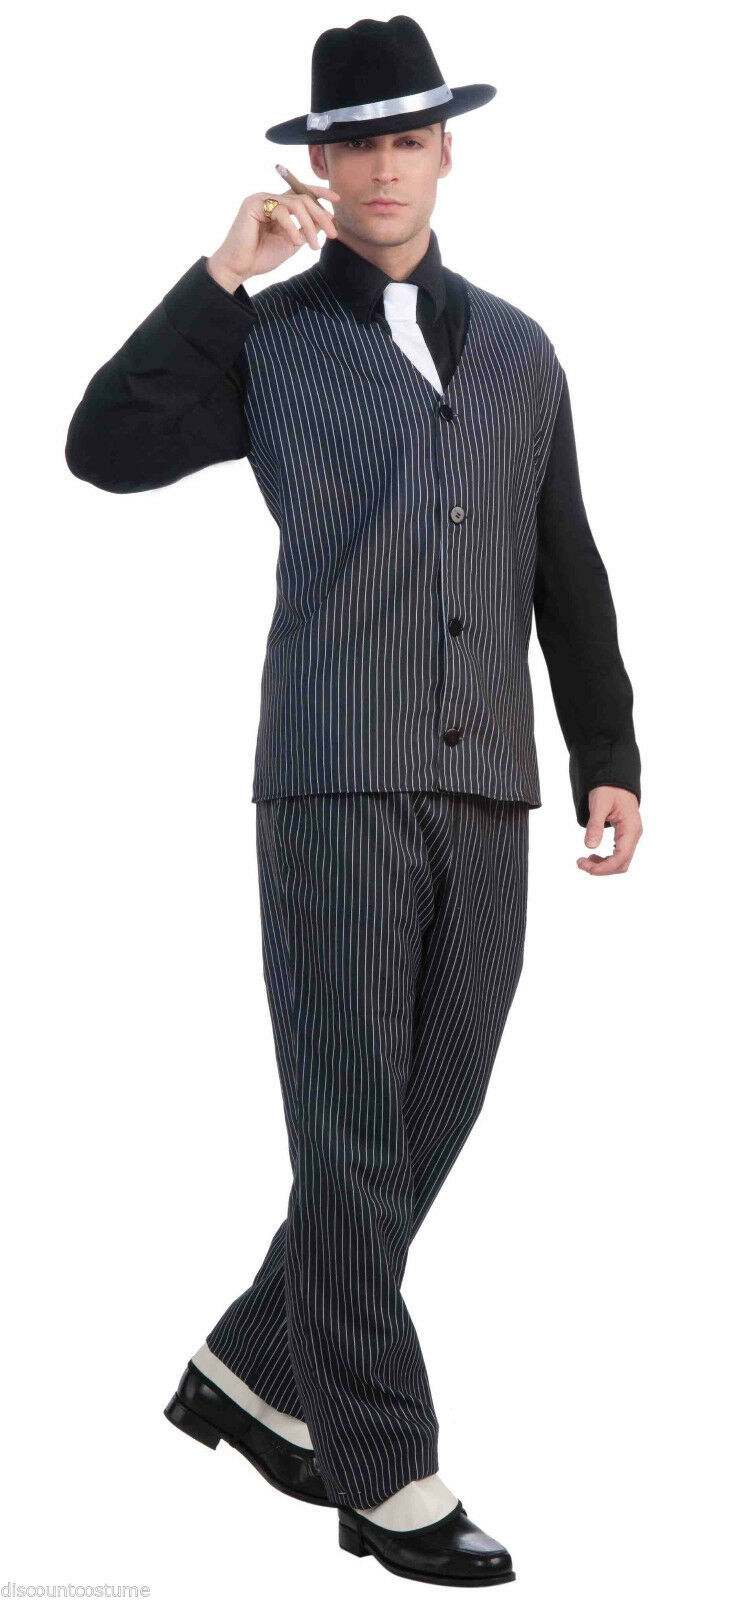 Primary image for 20's GANGSTER ADULT HALLOWEEN COSTUME MOBSTER PUBLIC ENEMY No.1 FUN@HALLOWEEN!!